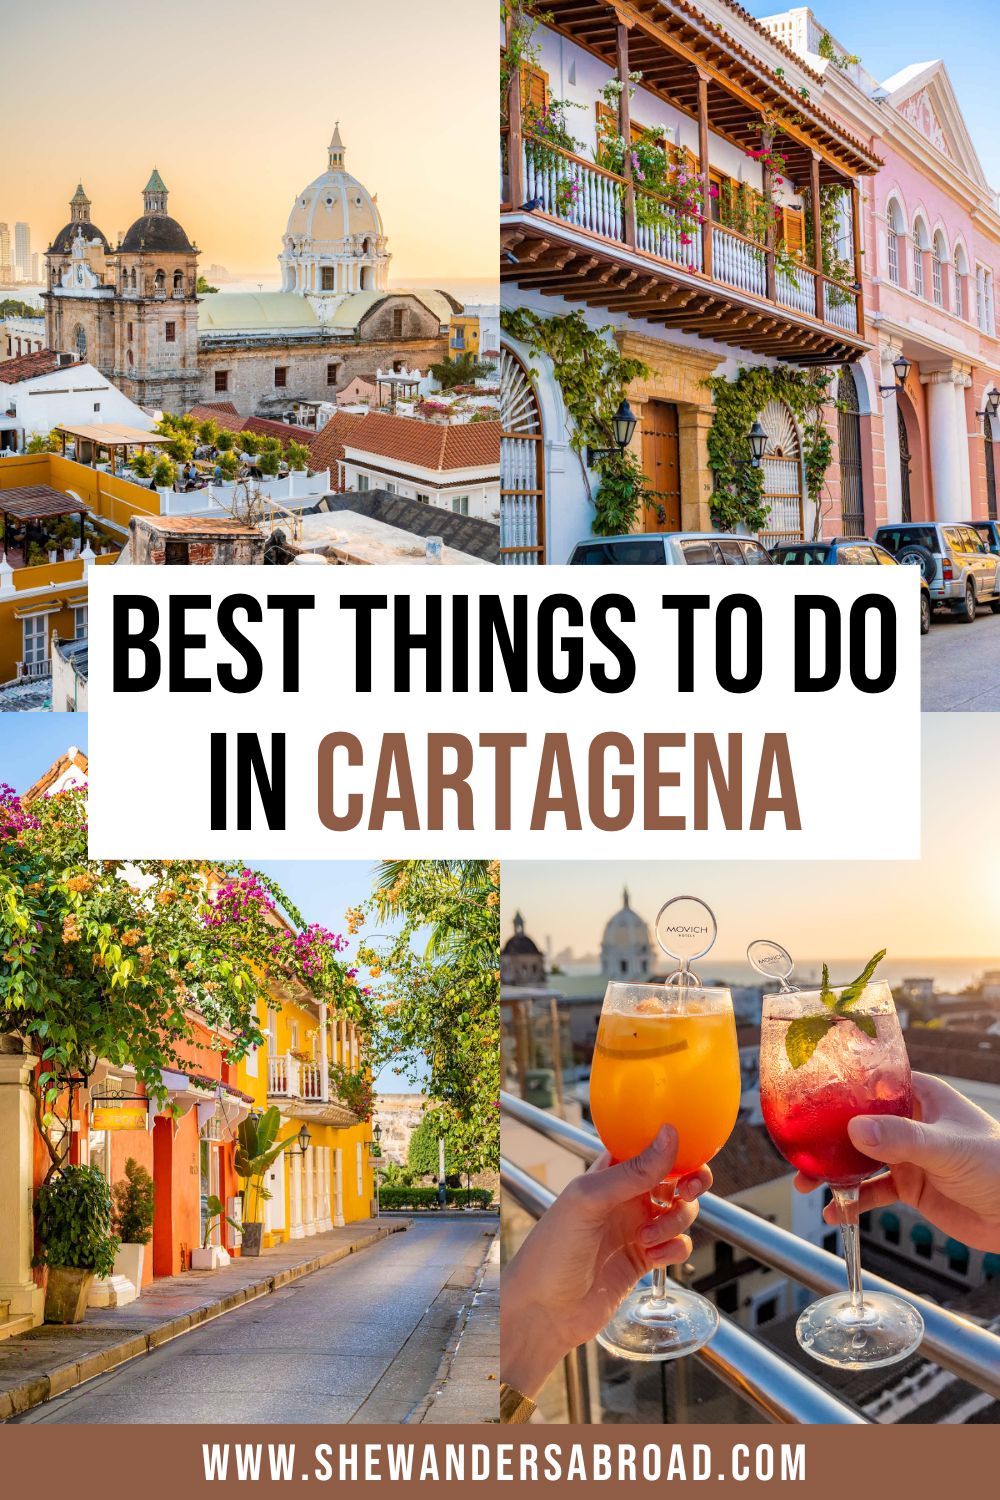 18 Best Things to Do in Cartagena You Can't Miss